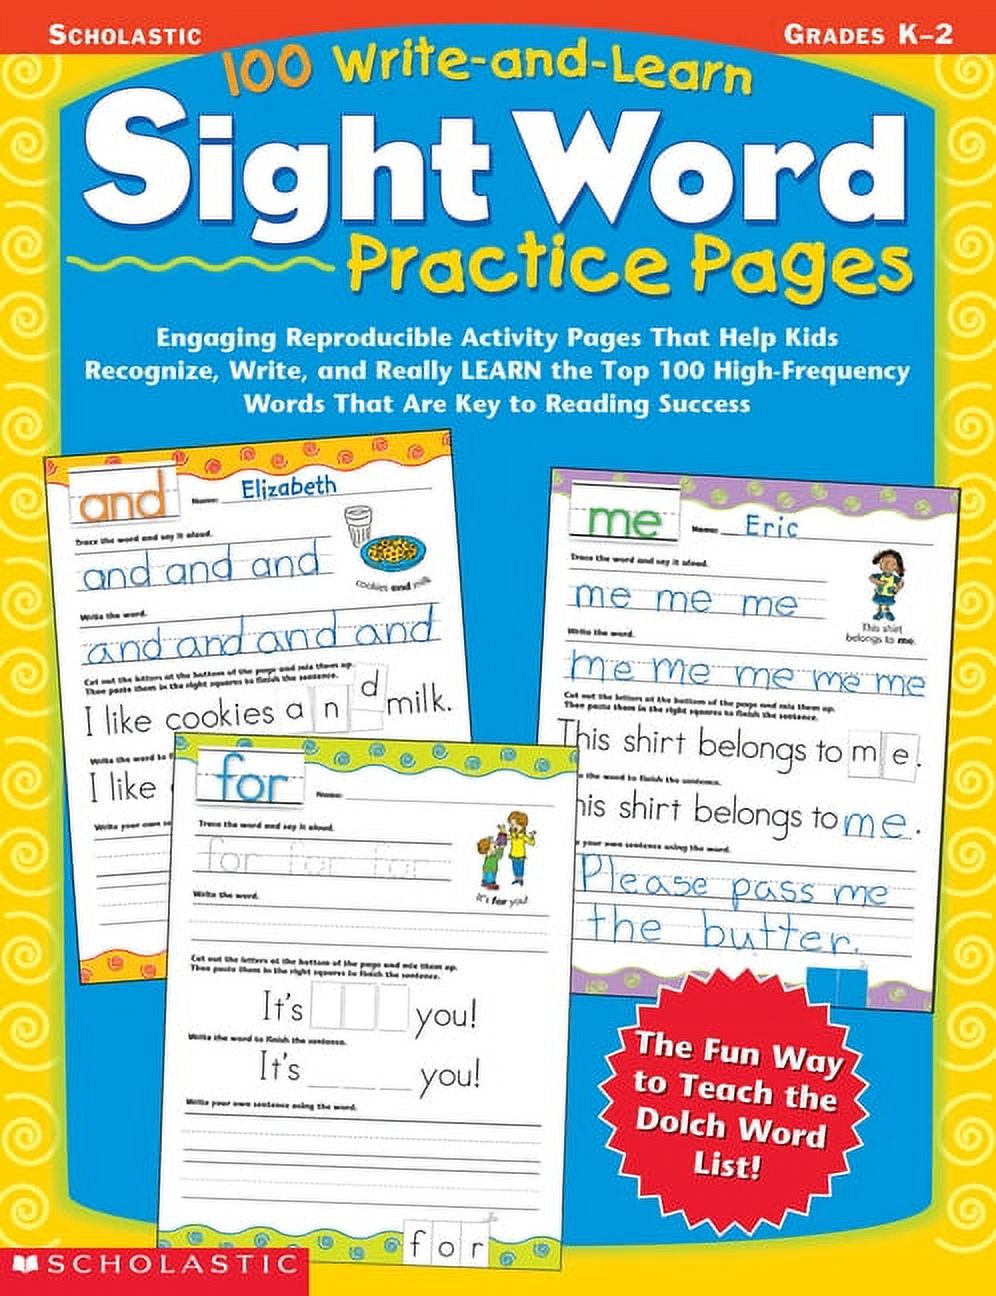 100 Write-And-Learn Sight Word Practice Pages: Engaging Reproducible Activity Pages That Help Kids Recognize, Write, and Really Learn the Top 100 High-Frequency Words That Are Key to Reading Success - image 1 of 1